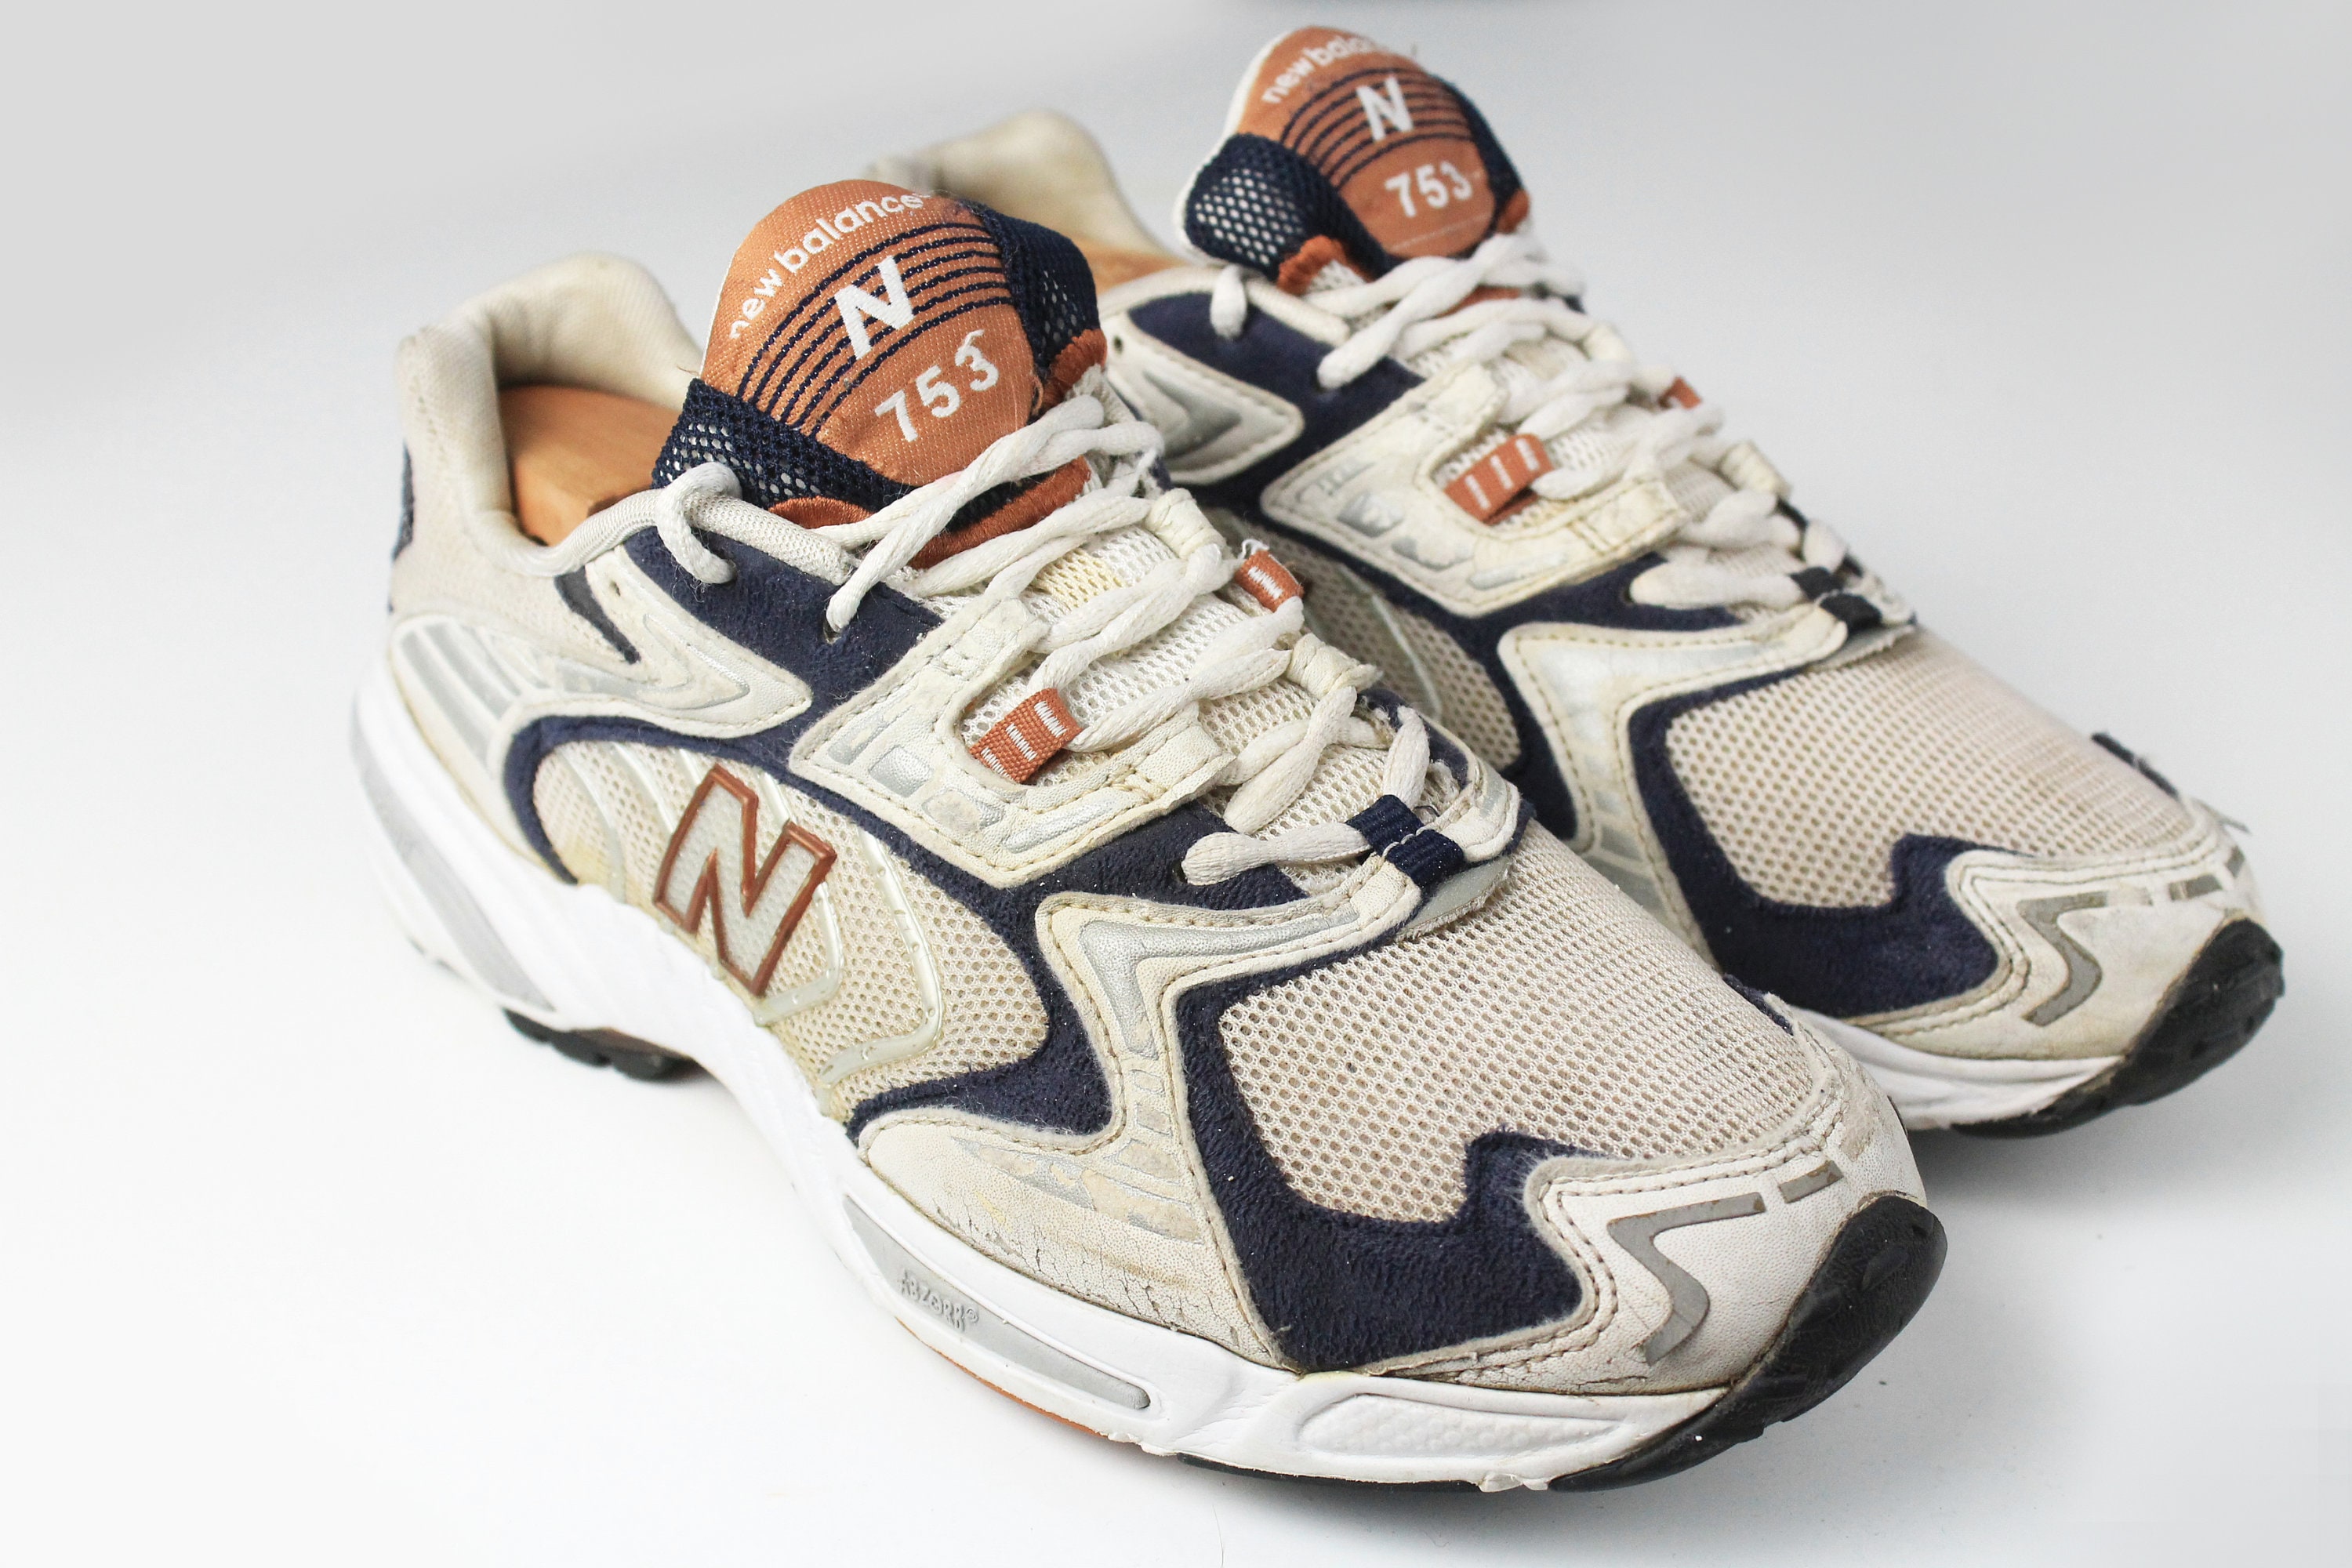 Vintage NEW BALANCE 753 Sneakers Athletic Shoes Size - Etsy